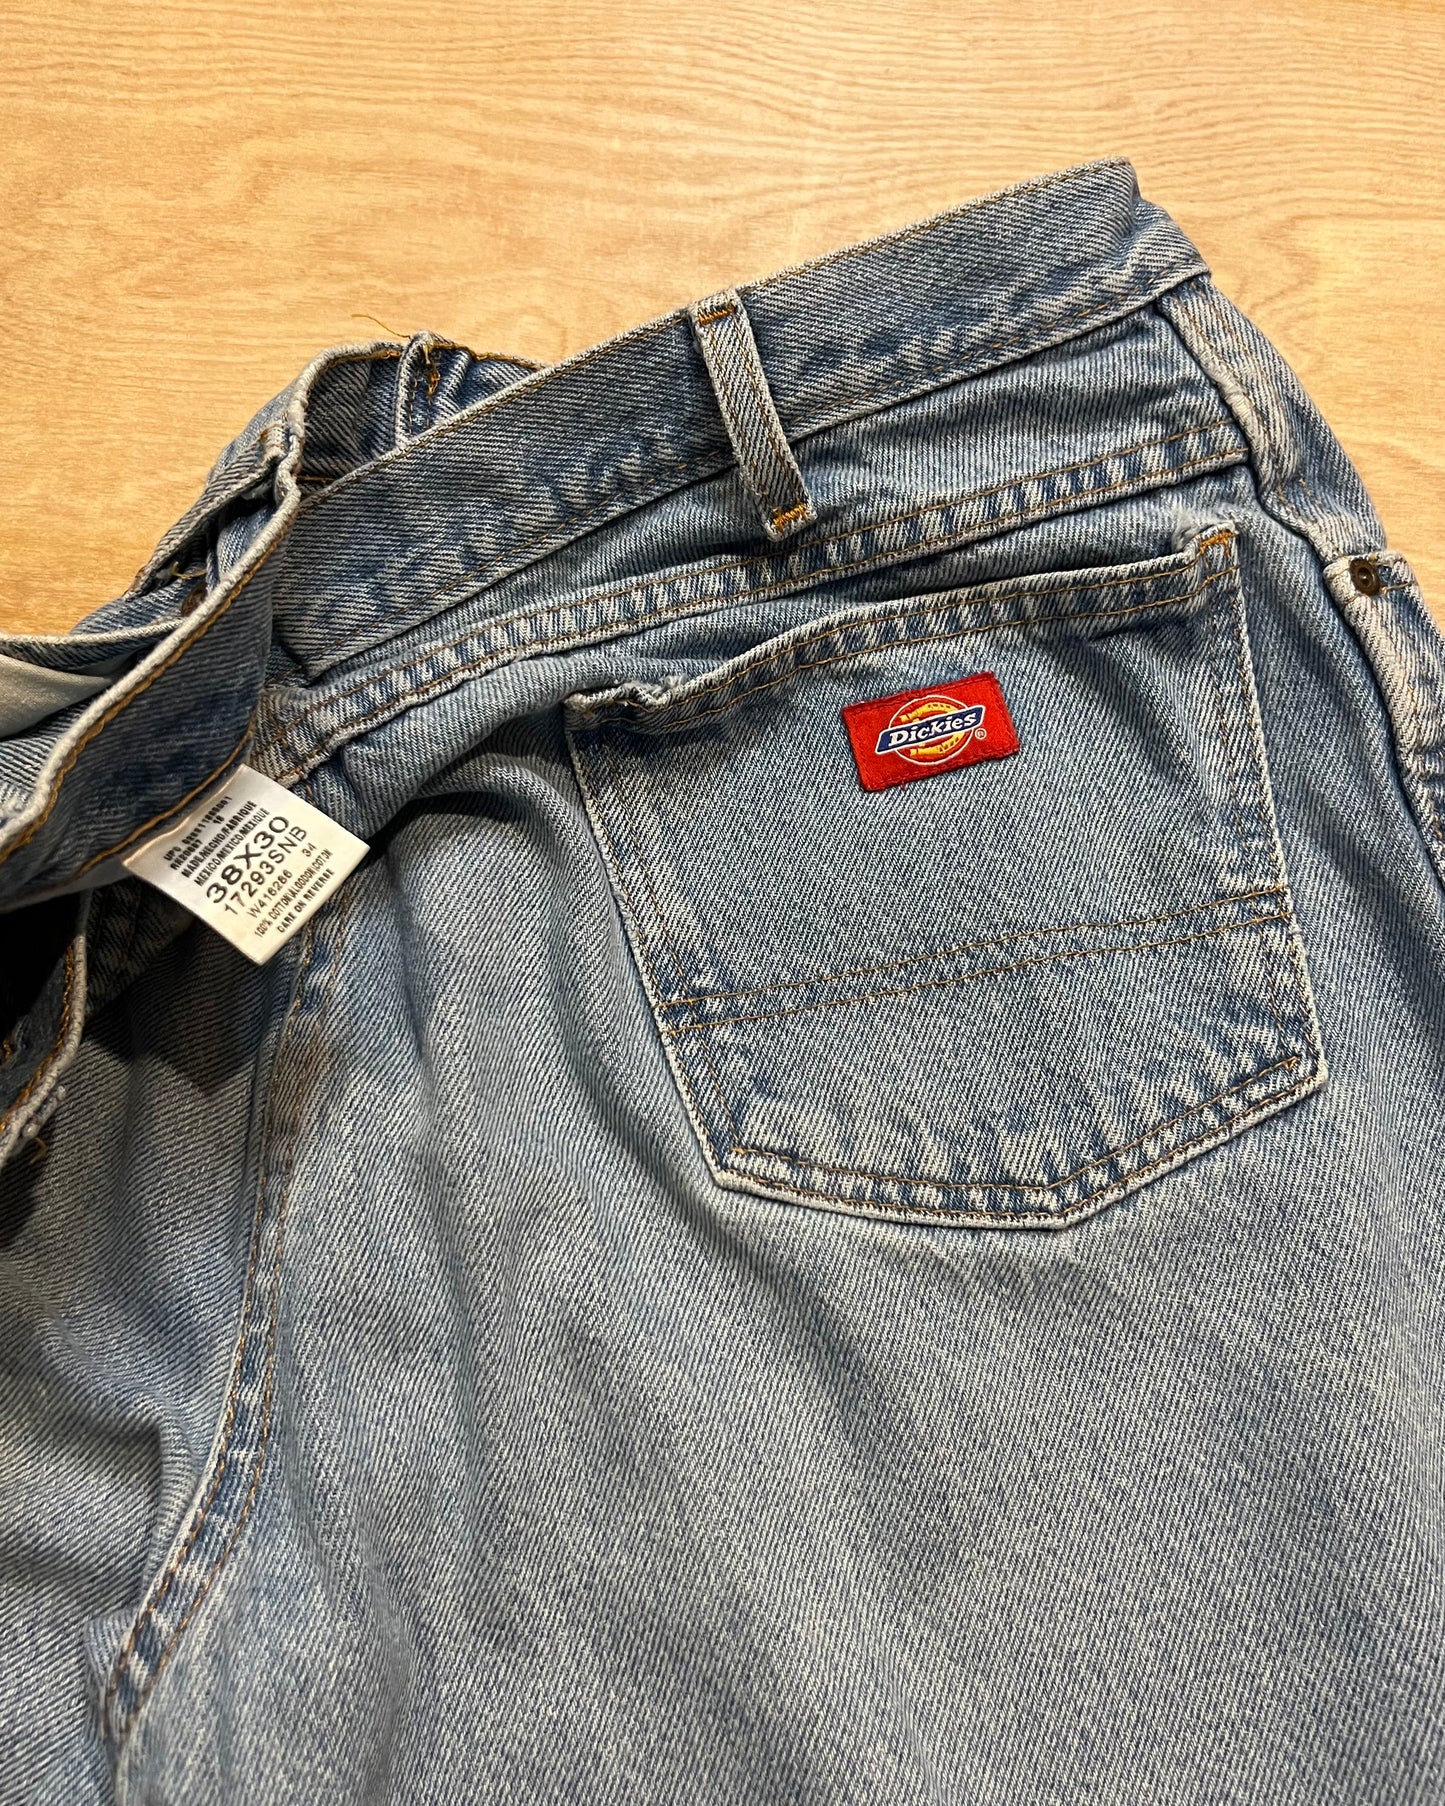 Classic Dickies Work Jeans